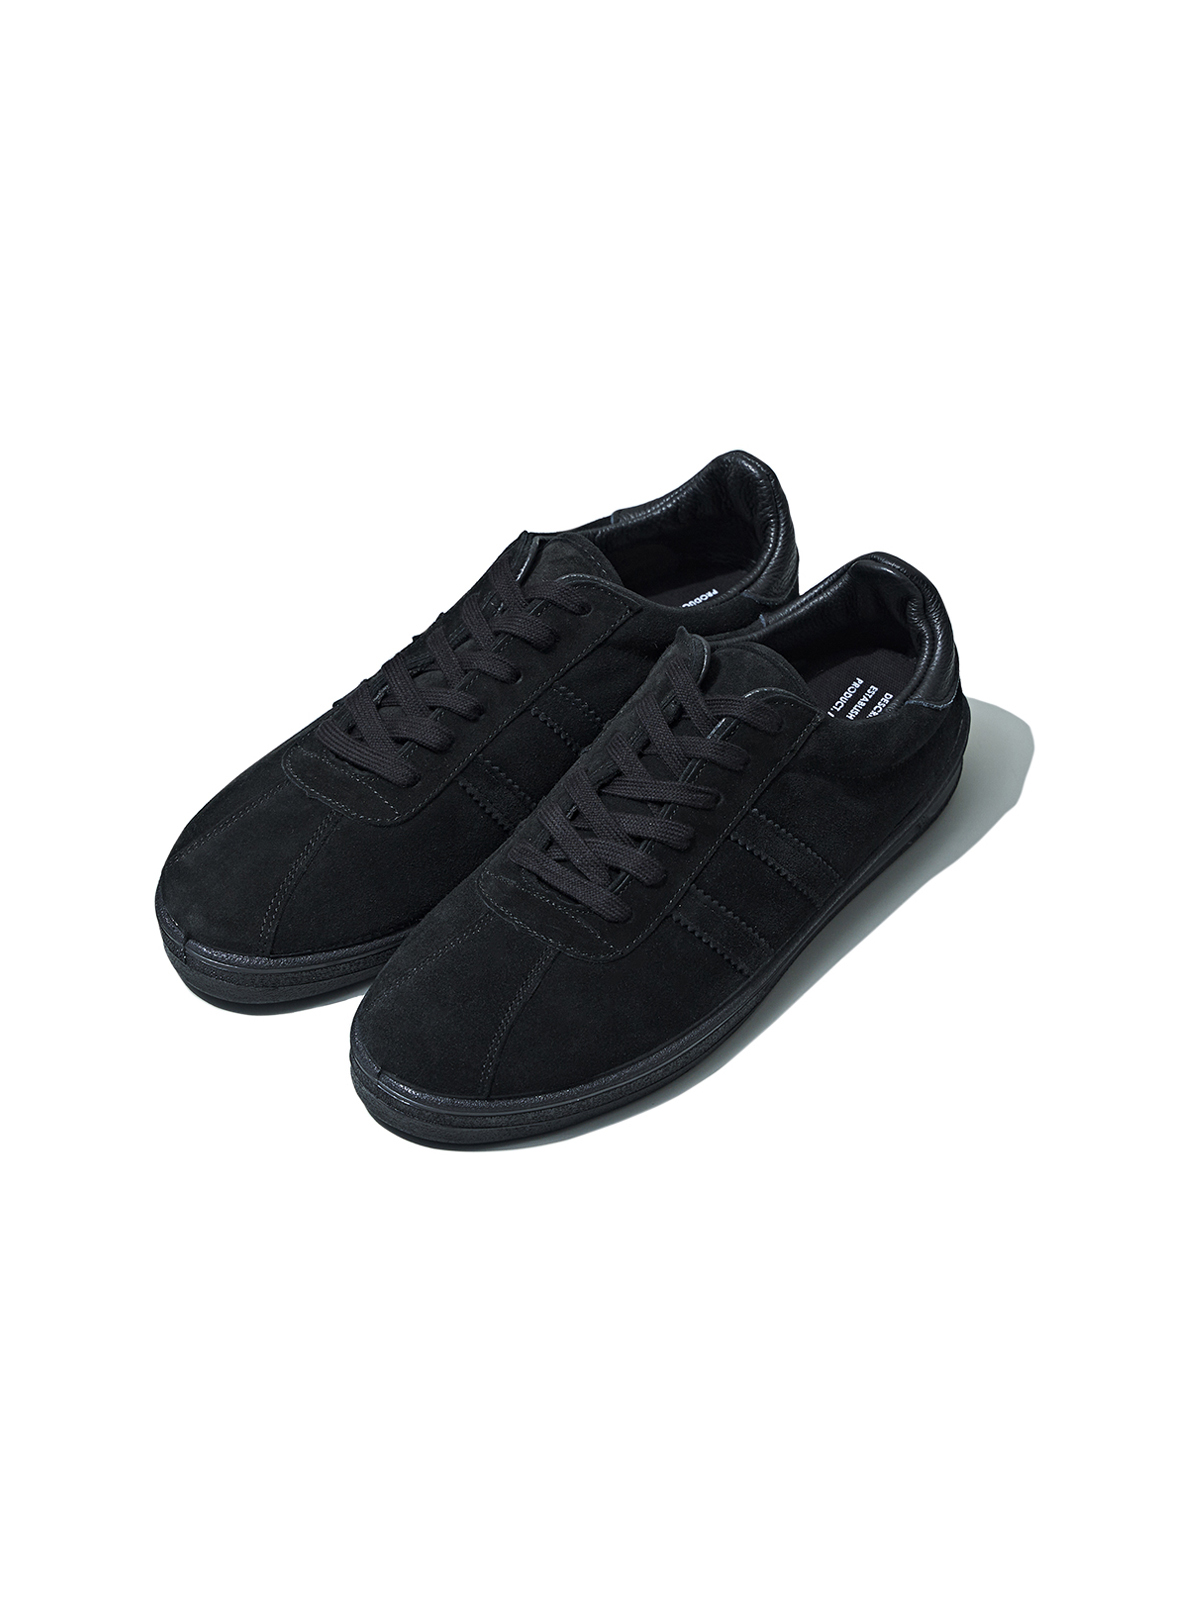 REPRODUCTION OF FOUND FOR GP RUSSIAN MILITARY TRAINER (TRIPLE BLACK)